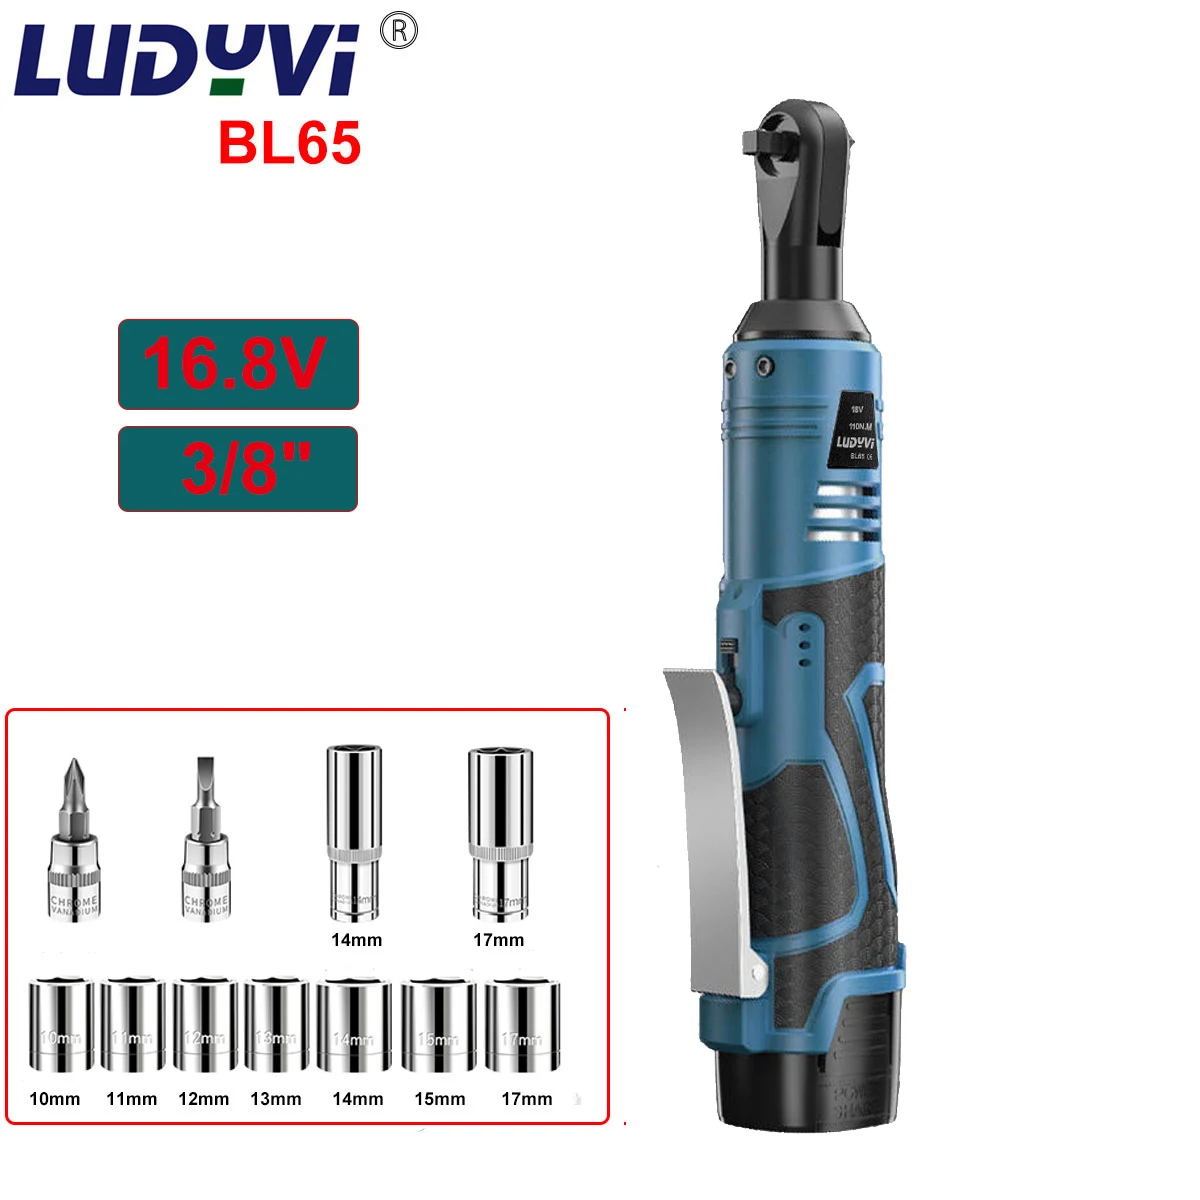 110NM Cordless Electric Wrench 16.8V 3/8 Ratchet Wrench Set Angle Screwdriver to Removal Screw Nut Car Repair Tool